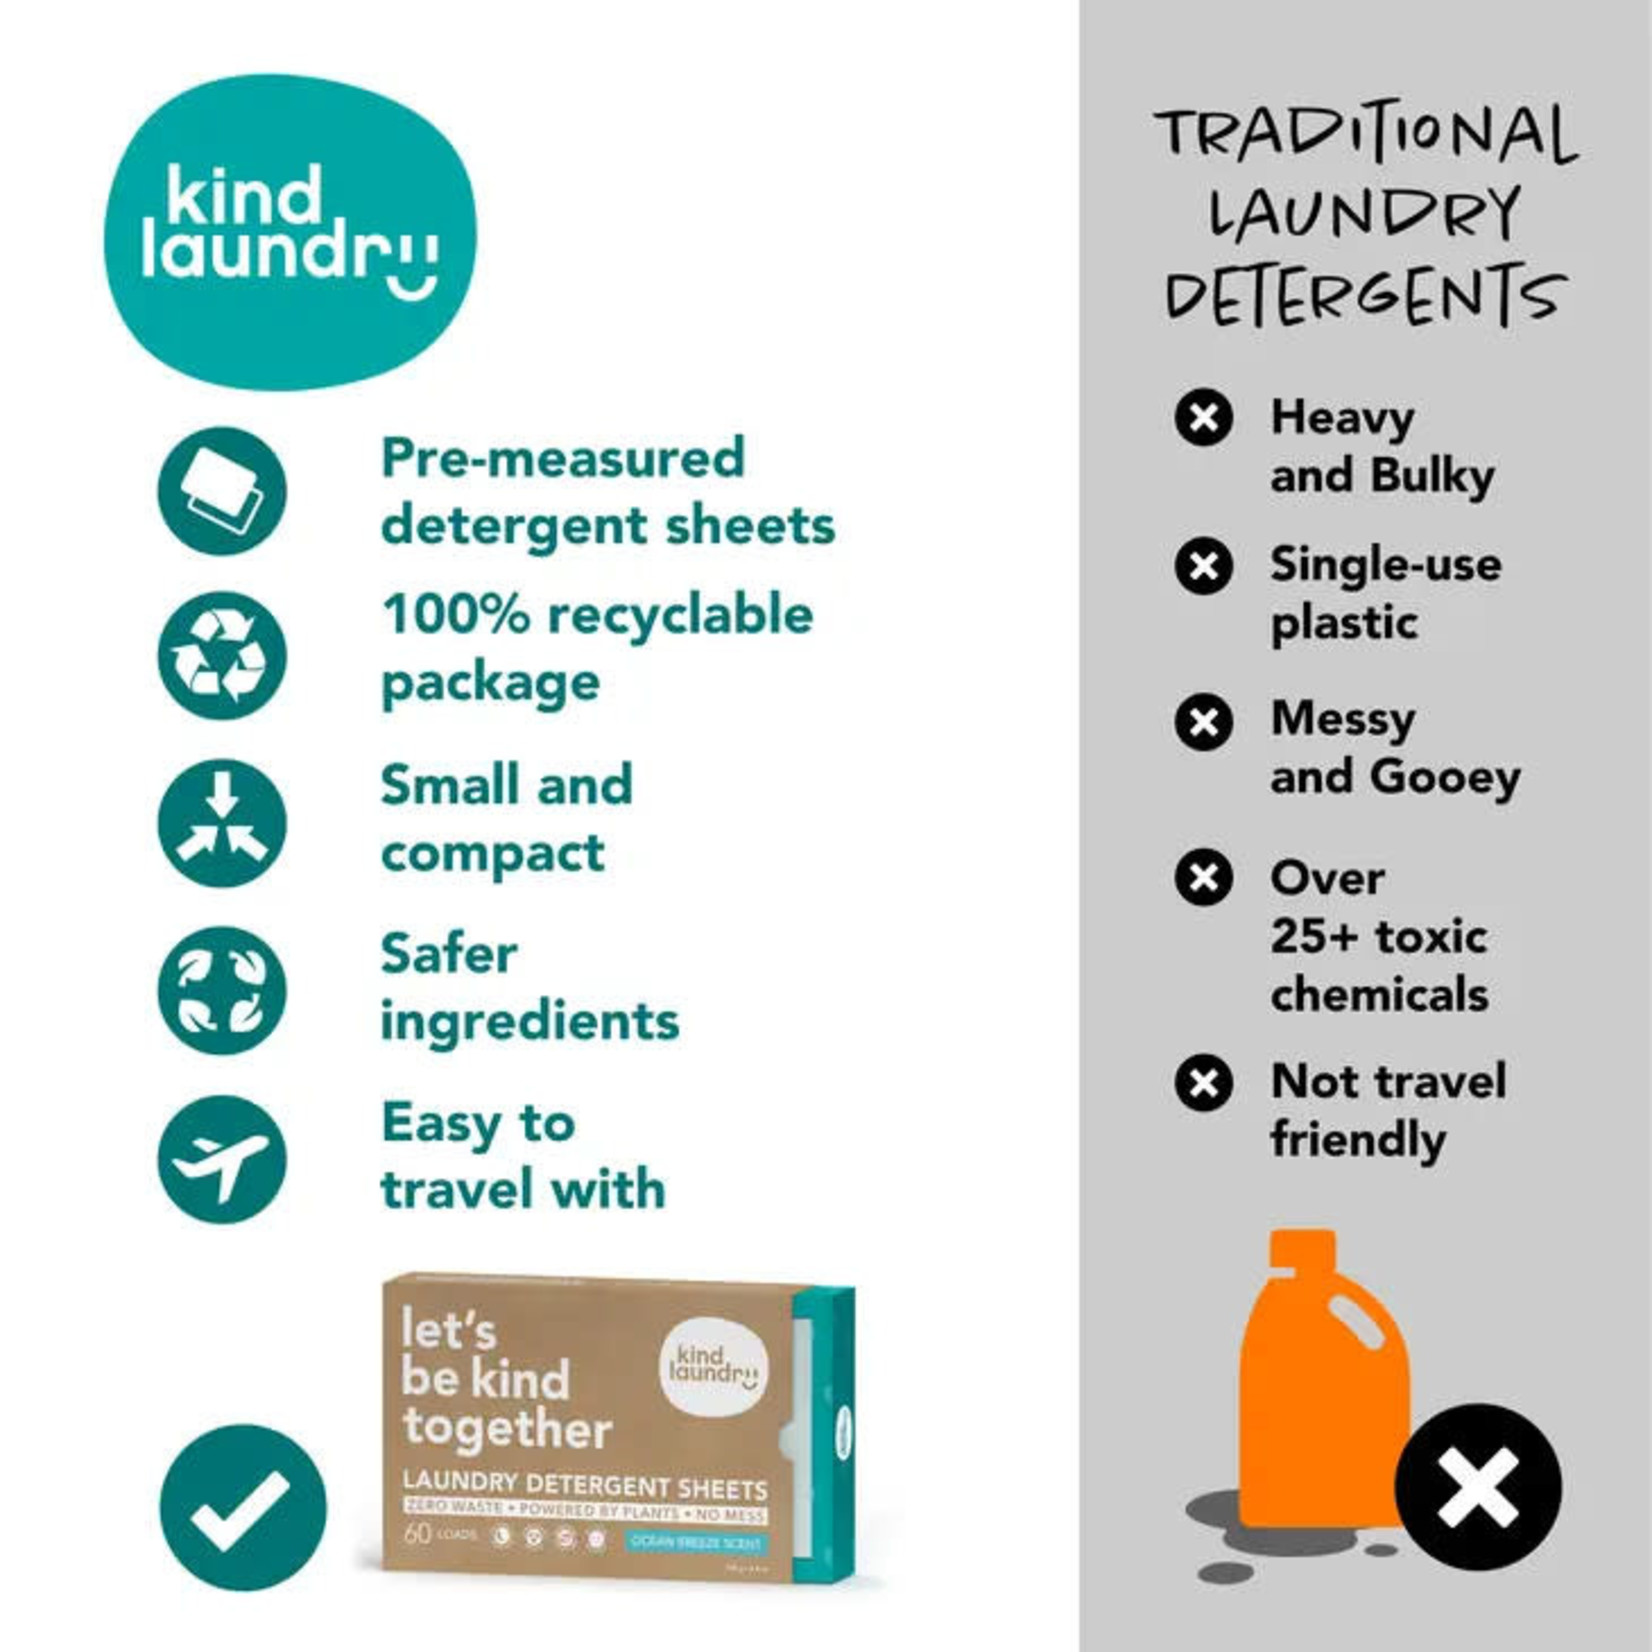 Kind Laundry Laundry Detergent Sheets